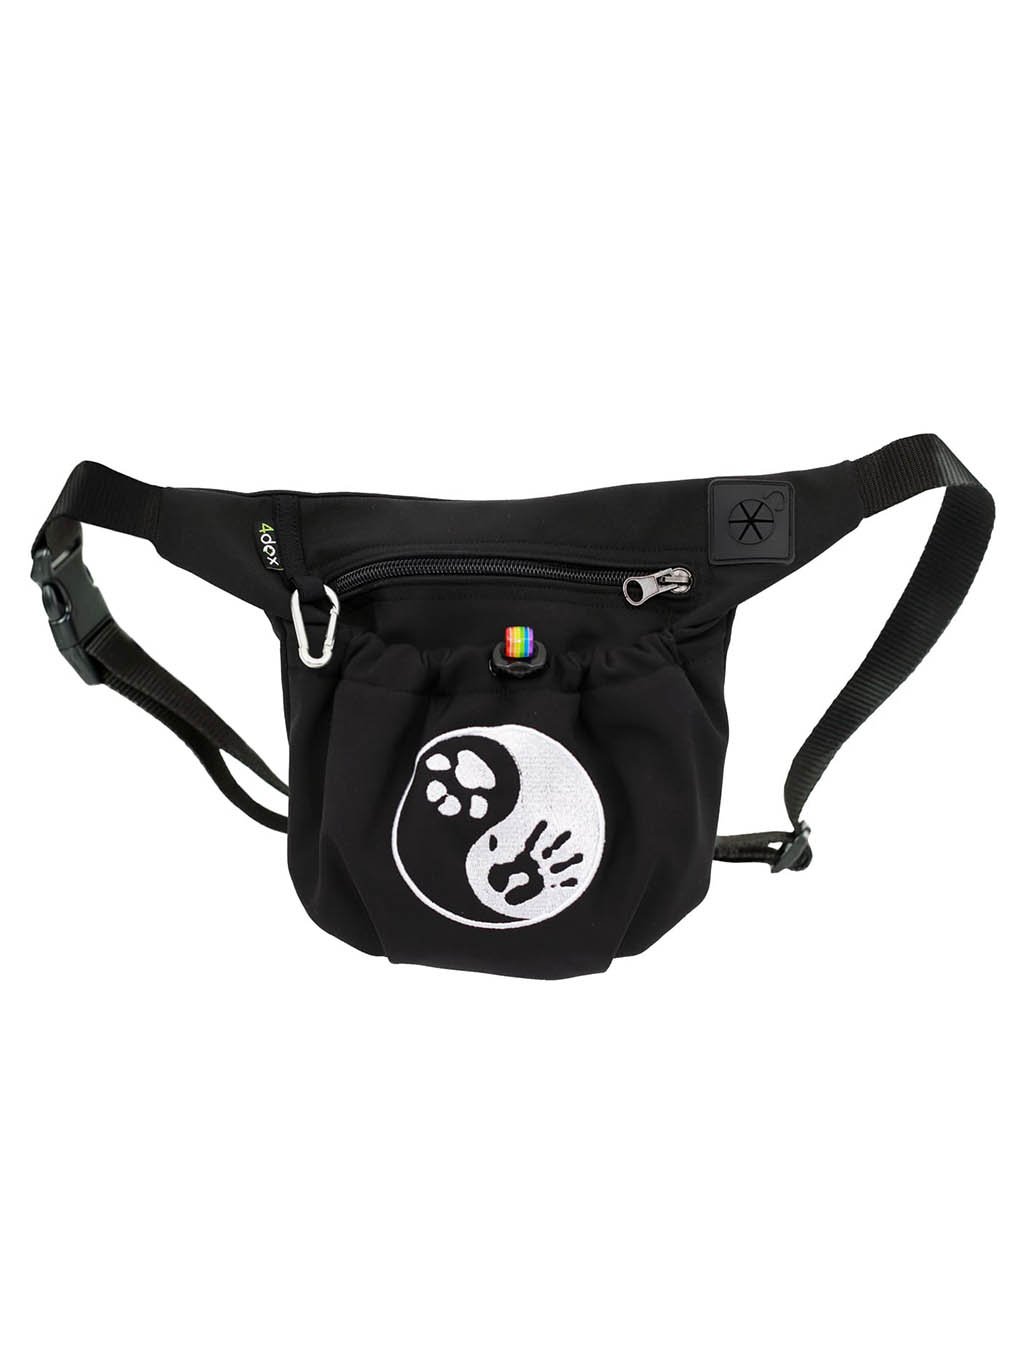 Dog training treat pouch 2 in 1 Dog Yin and Yang No. 9